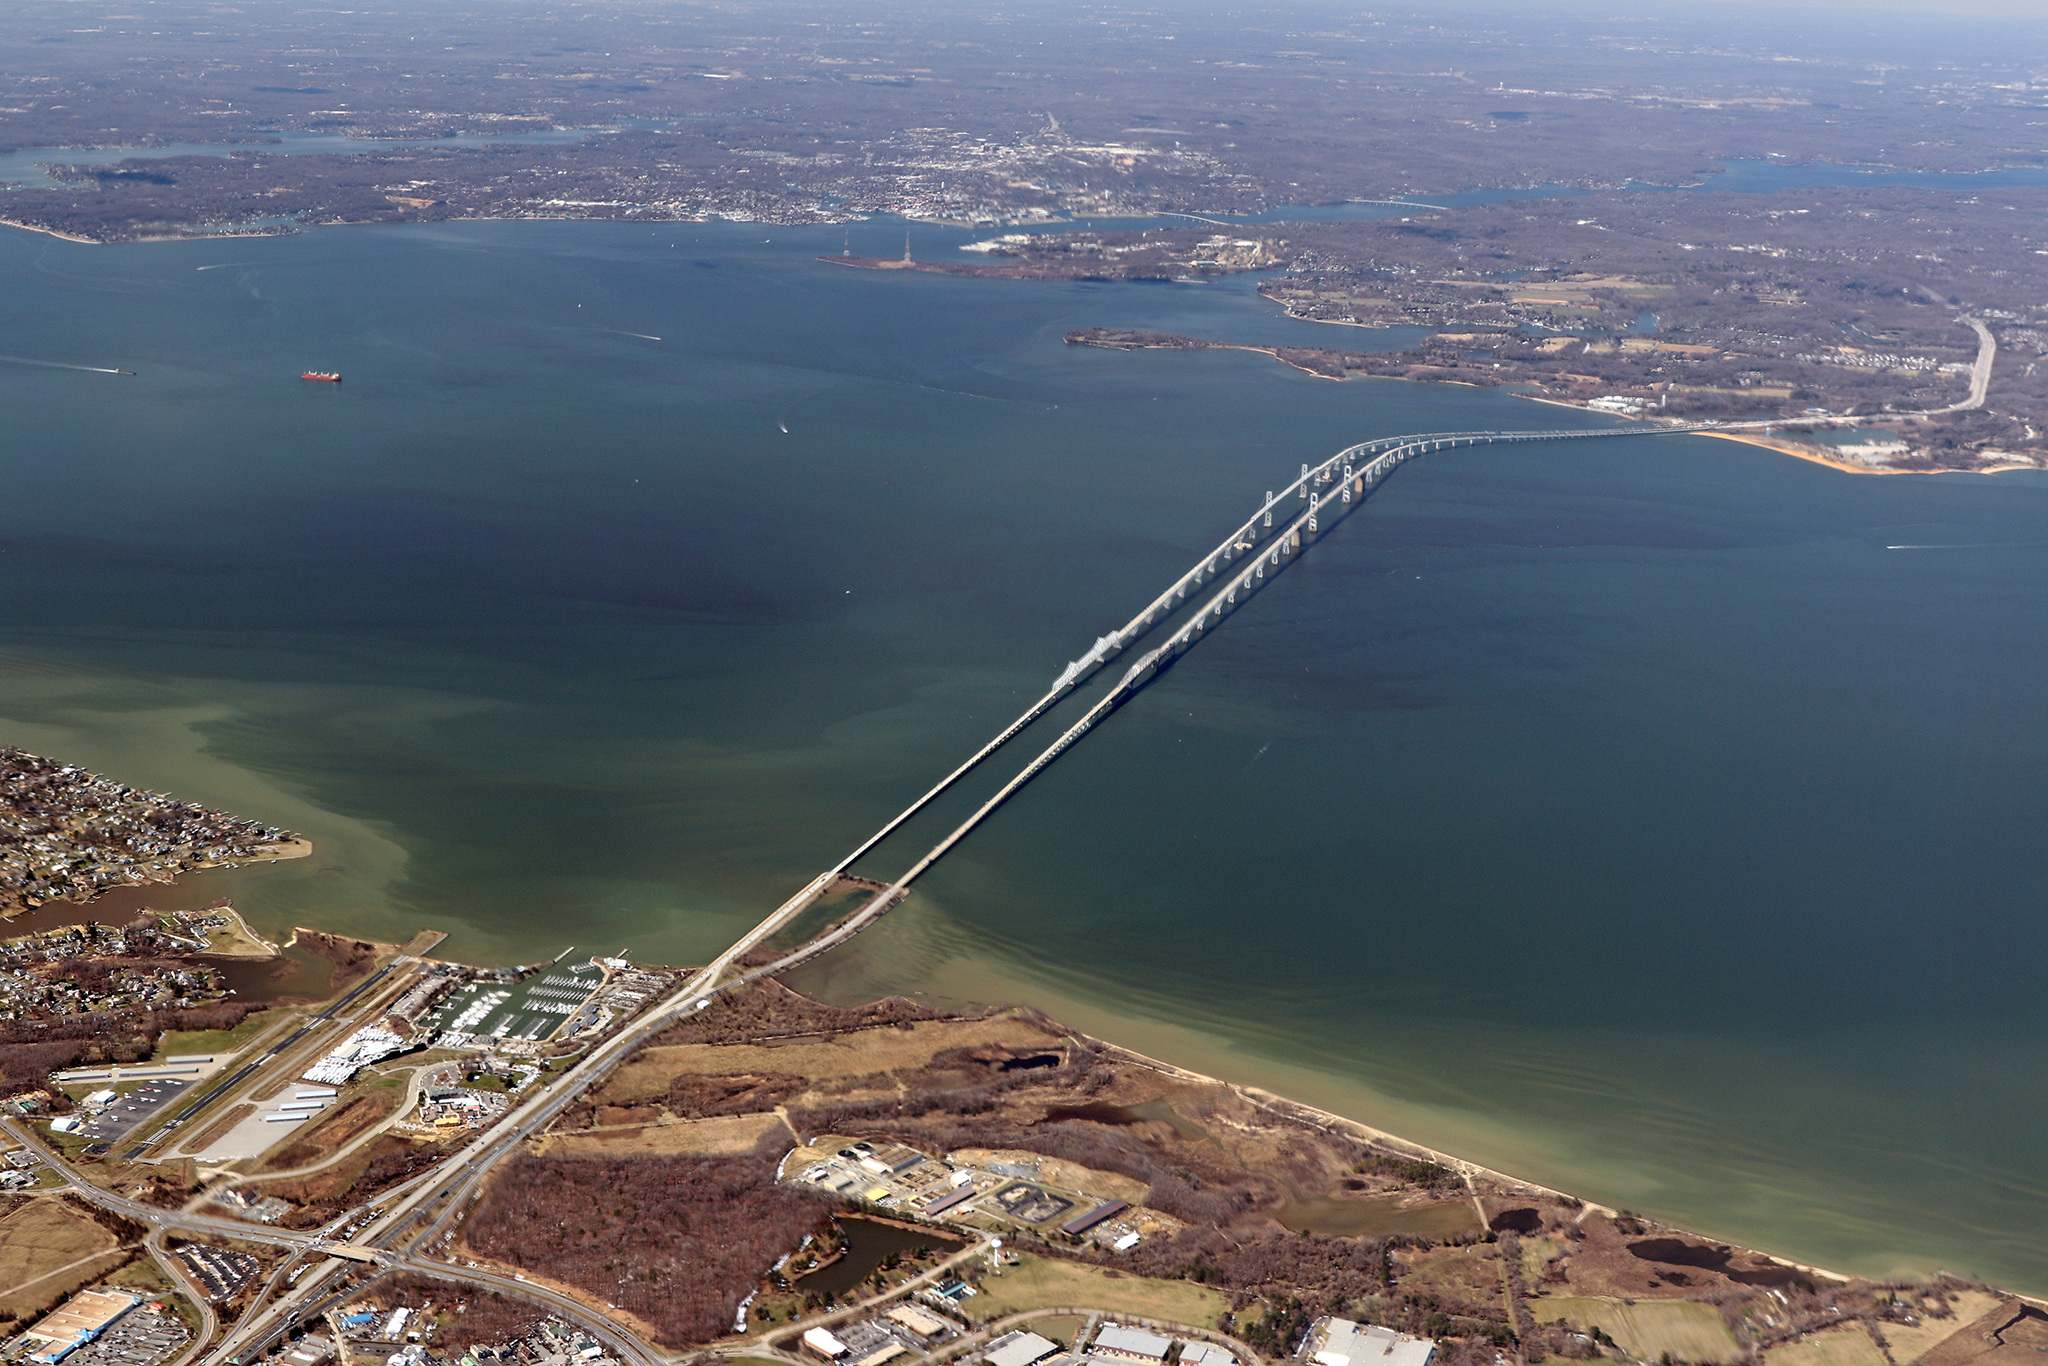  The Chesapeake Bay Bridge as seen from 6,000 feet. You can see Bay Bridge Airport in the lower left corner. 